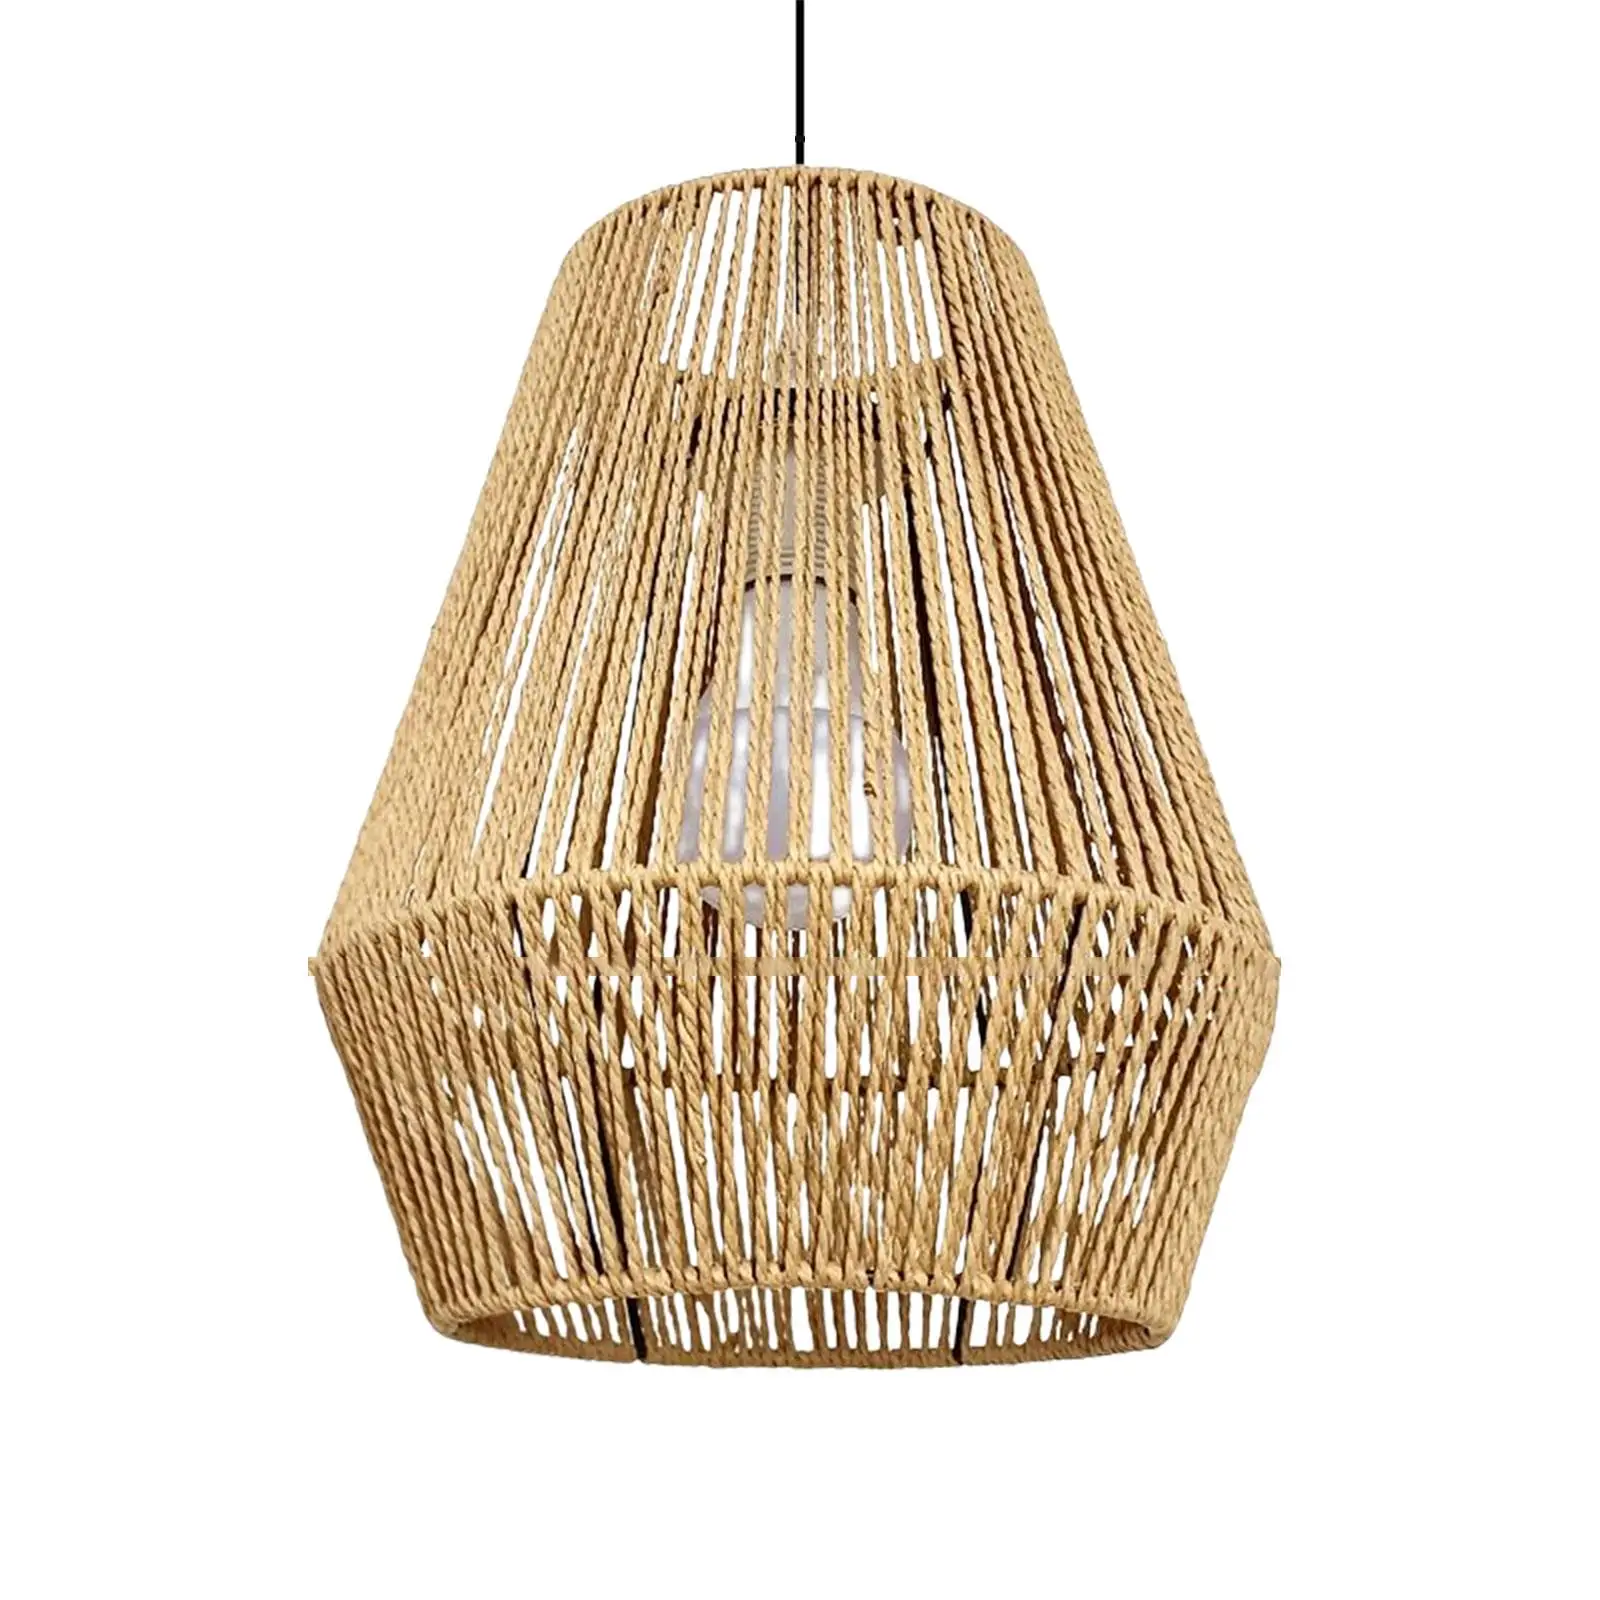 Rope Woven Hanging Lamp Shade Light Shade Accessories for Hotel Restaurant Sturdy Dust Proof Chandelier Cover DIY Light Fixture